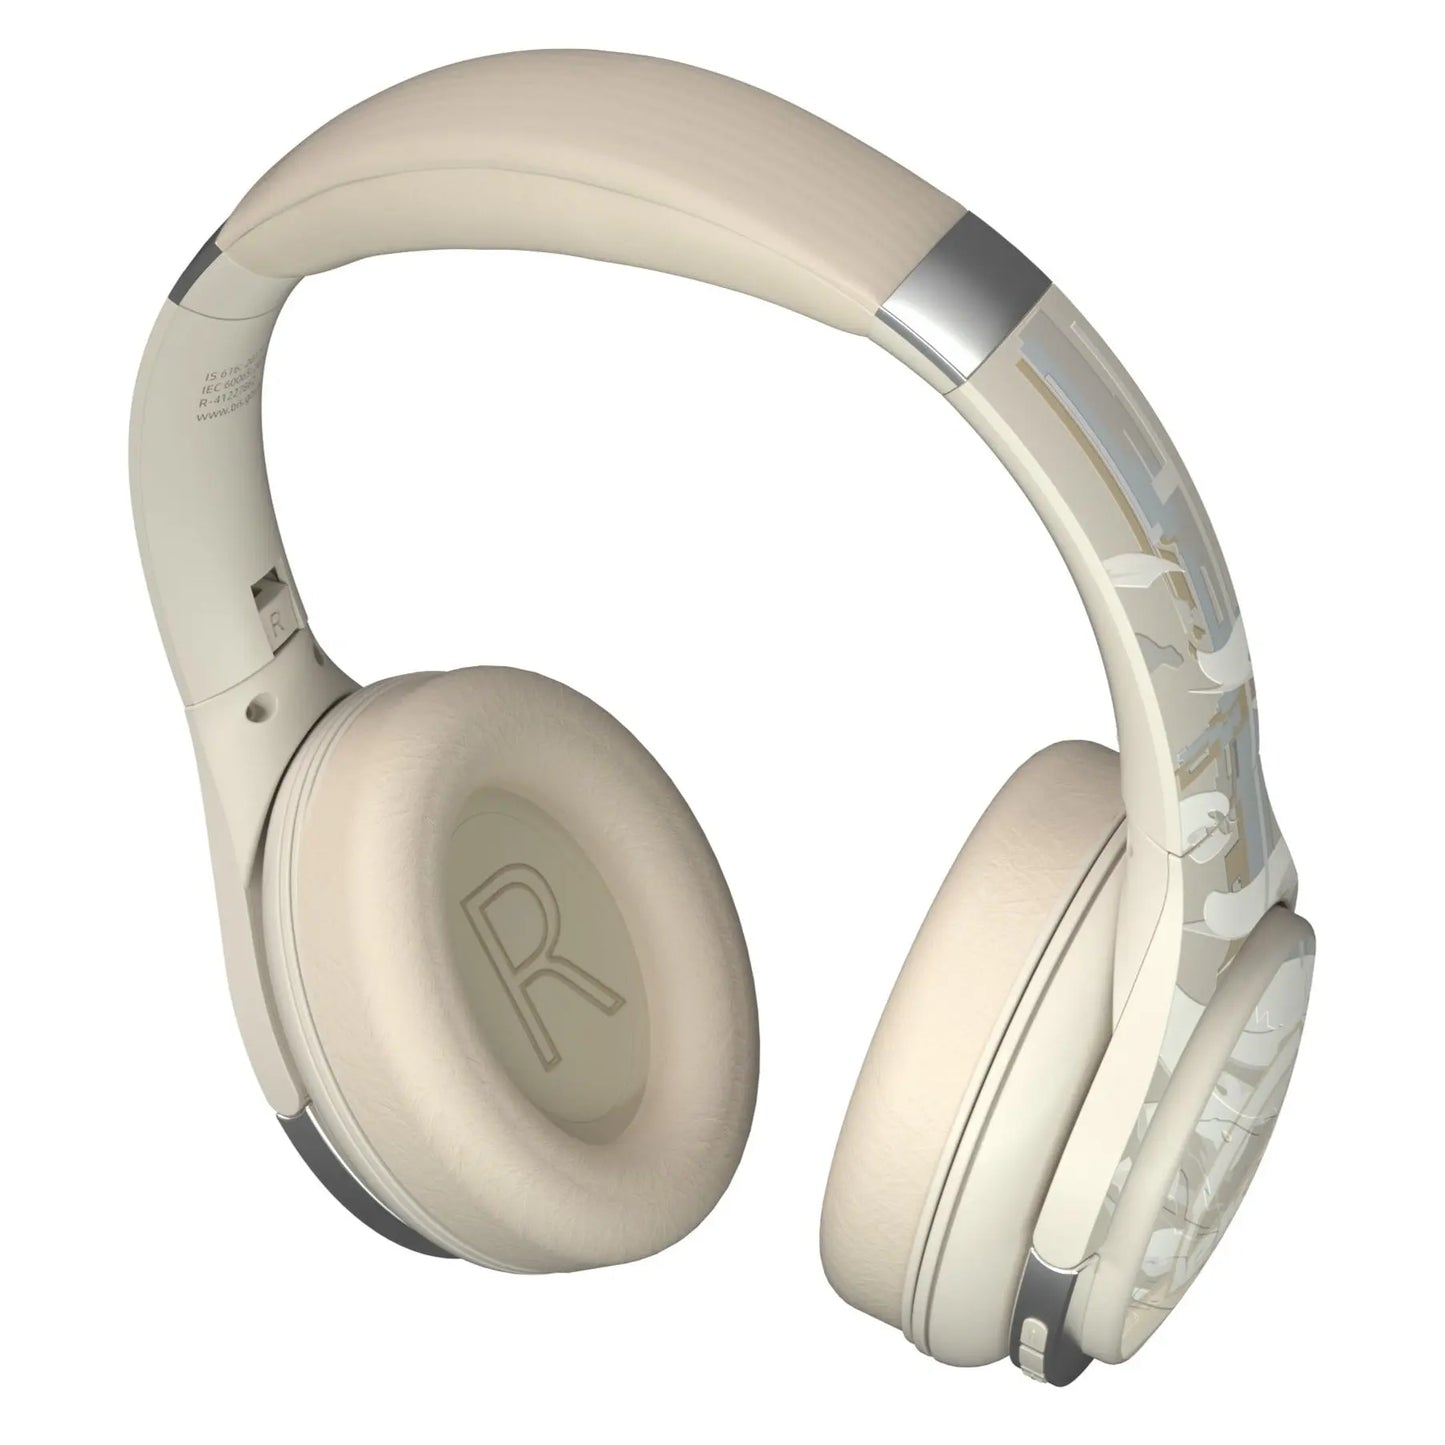 EKKO Skull Pro AlterEgo H03 White Scar : Wireless Headphones with ANC, 40ms Latency, 90-Hour Playback, Bluetooth On Ear, Max Bass, Mic